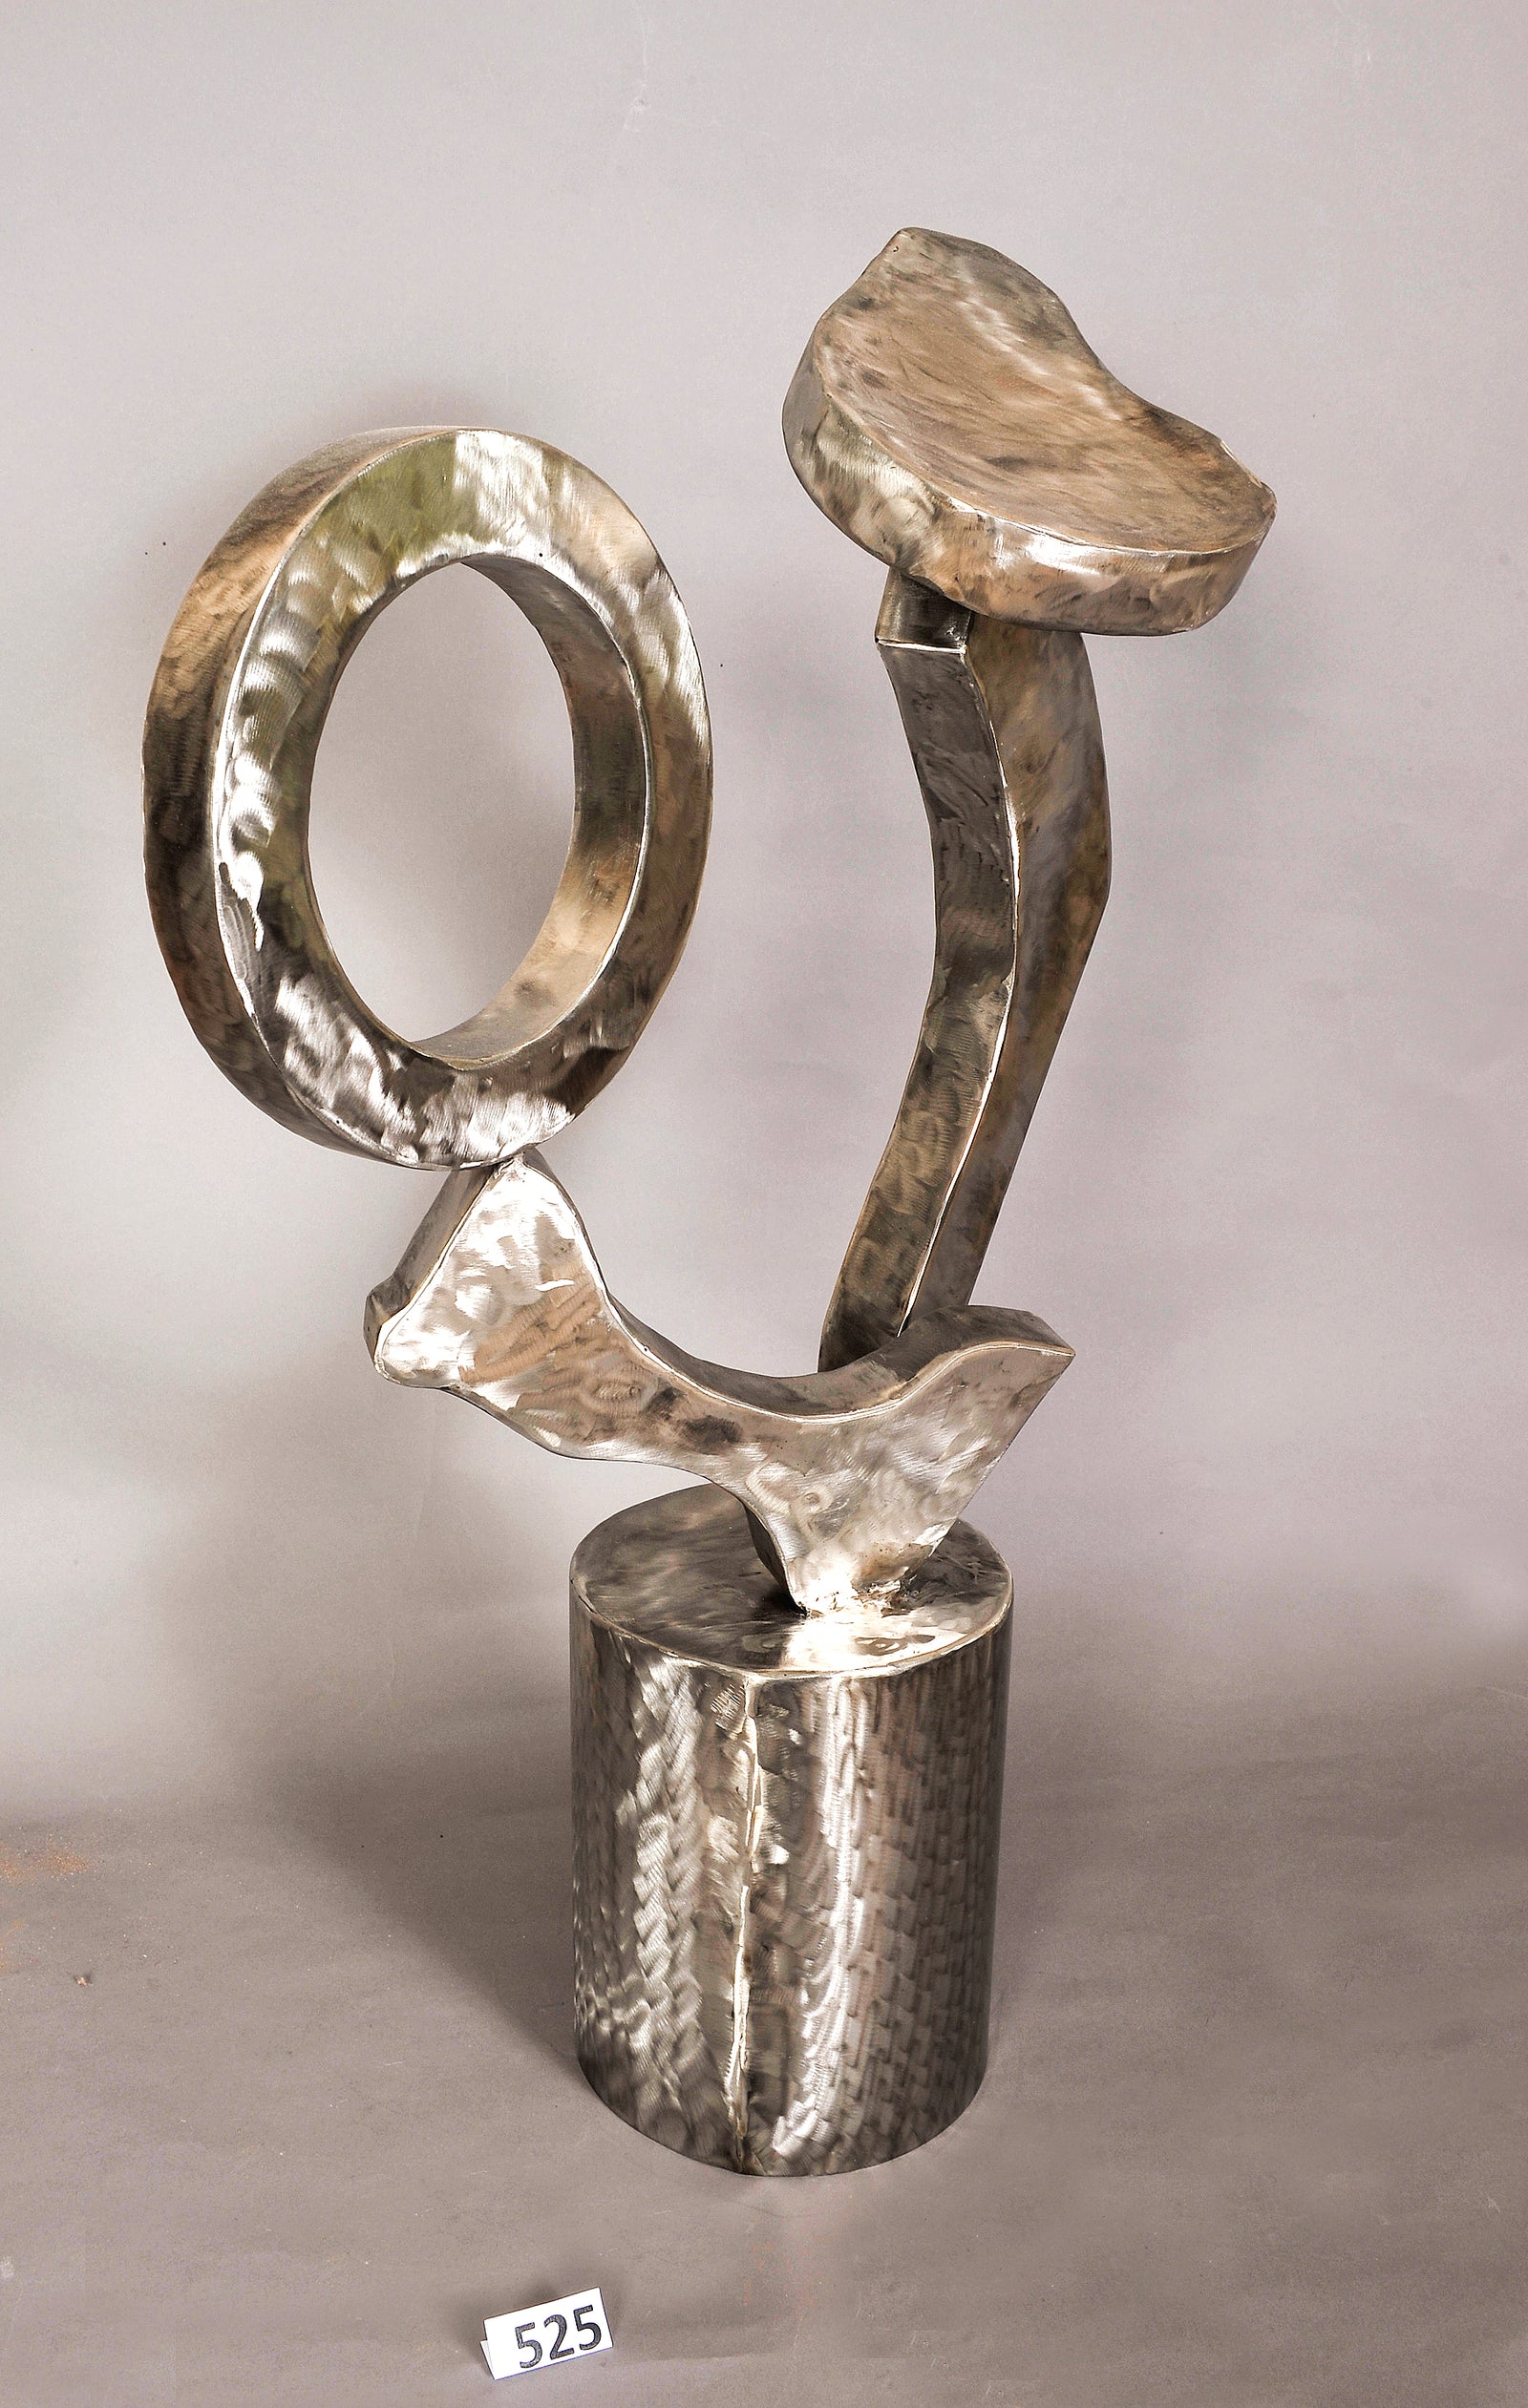 Suspension. Stainless Seel Sculpture.